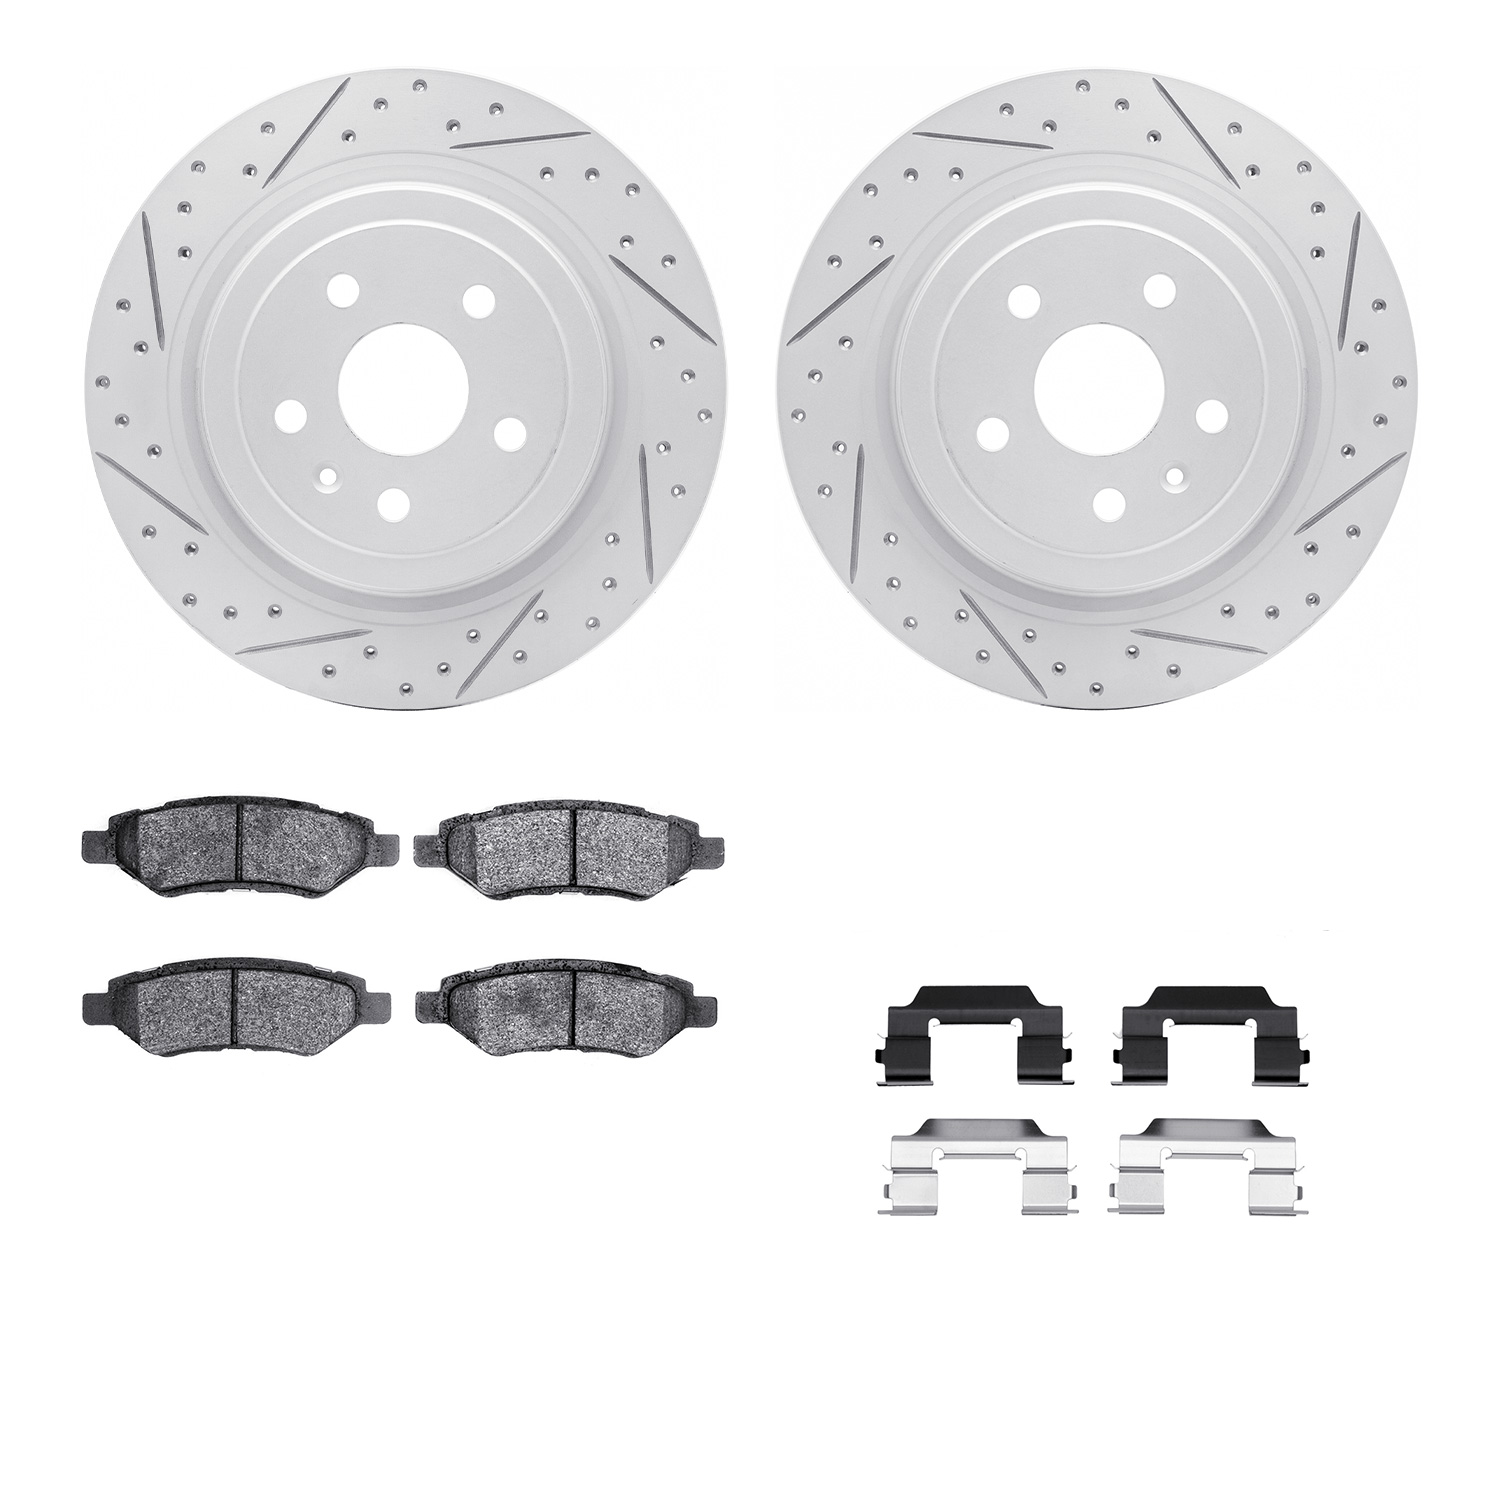 2512-46015 Geoperformance Drilled/Slotted Rotors w/5000 Advanced Brake Pads Kit & Hardware, 2008-2014 GM, Position: Rear